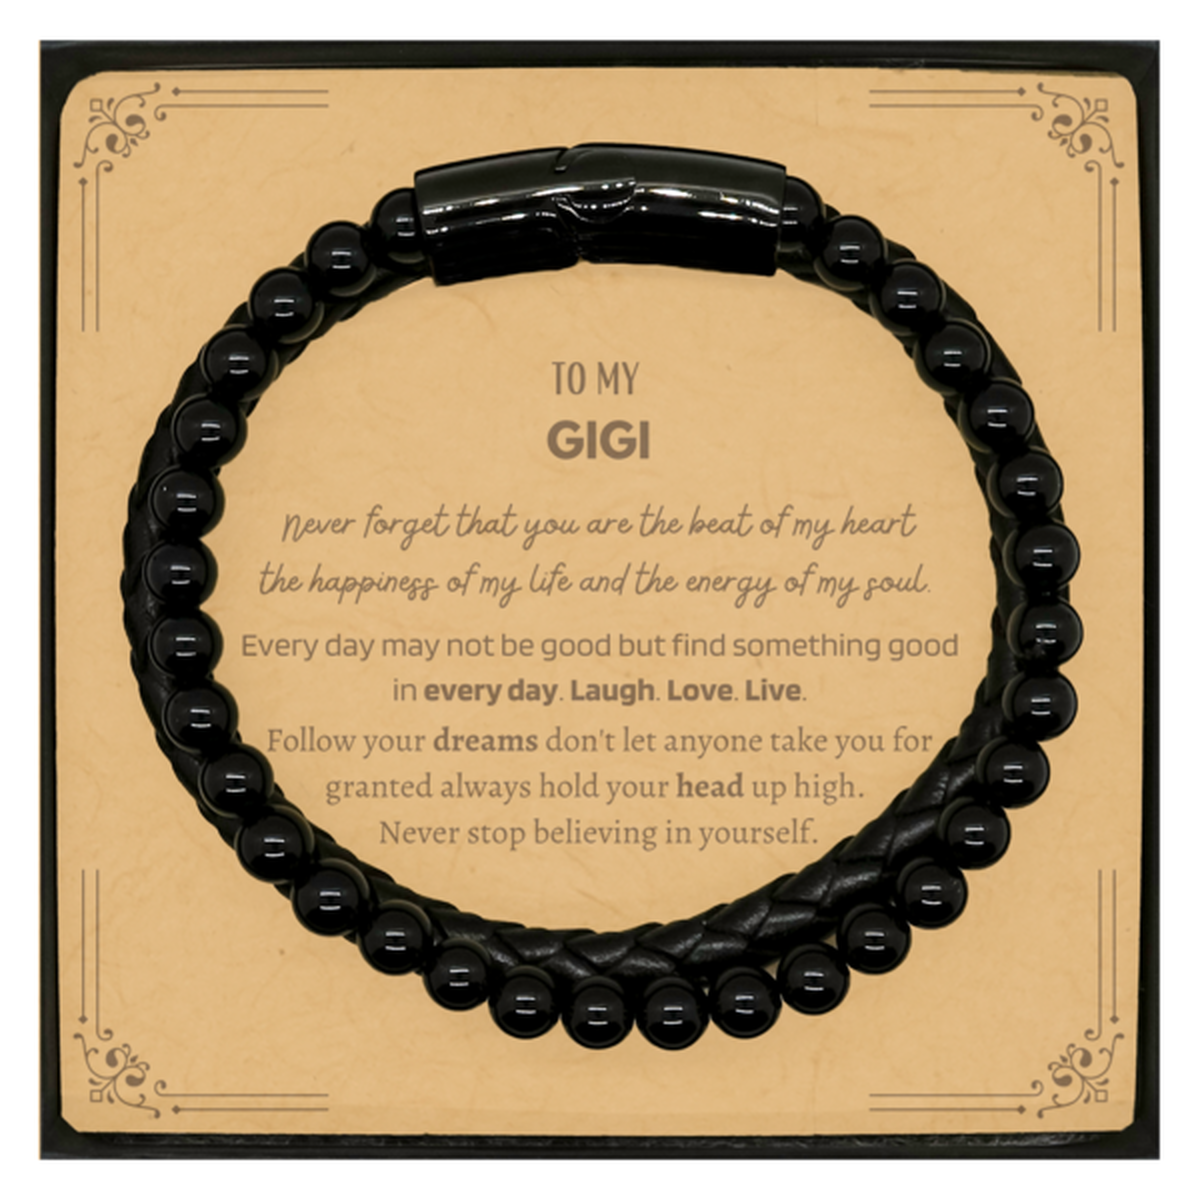 To My Gigi Message Card Gifts, Christmas Gigi Stone Leather Bracelets Present, Birthday Unique Motivational For Gigi, To My Gigi Never forget that you are the beat of my heart the happiness of my life and the energy of my soul